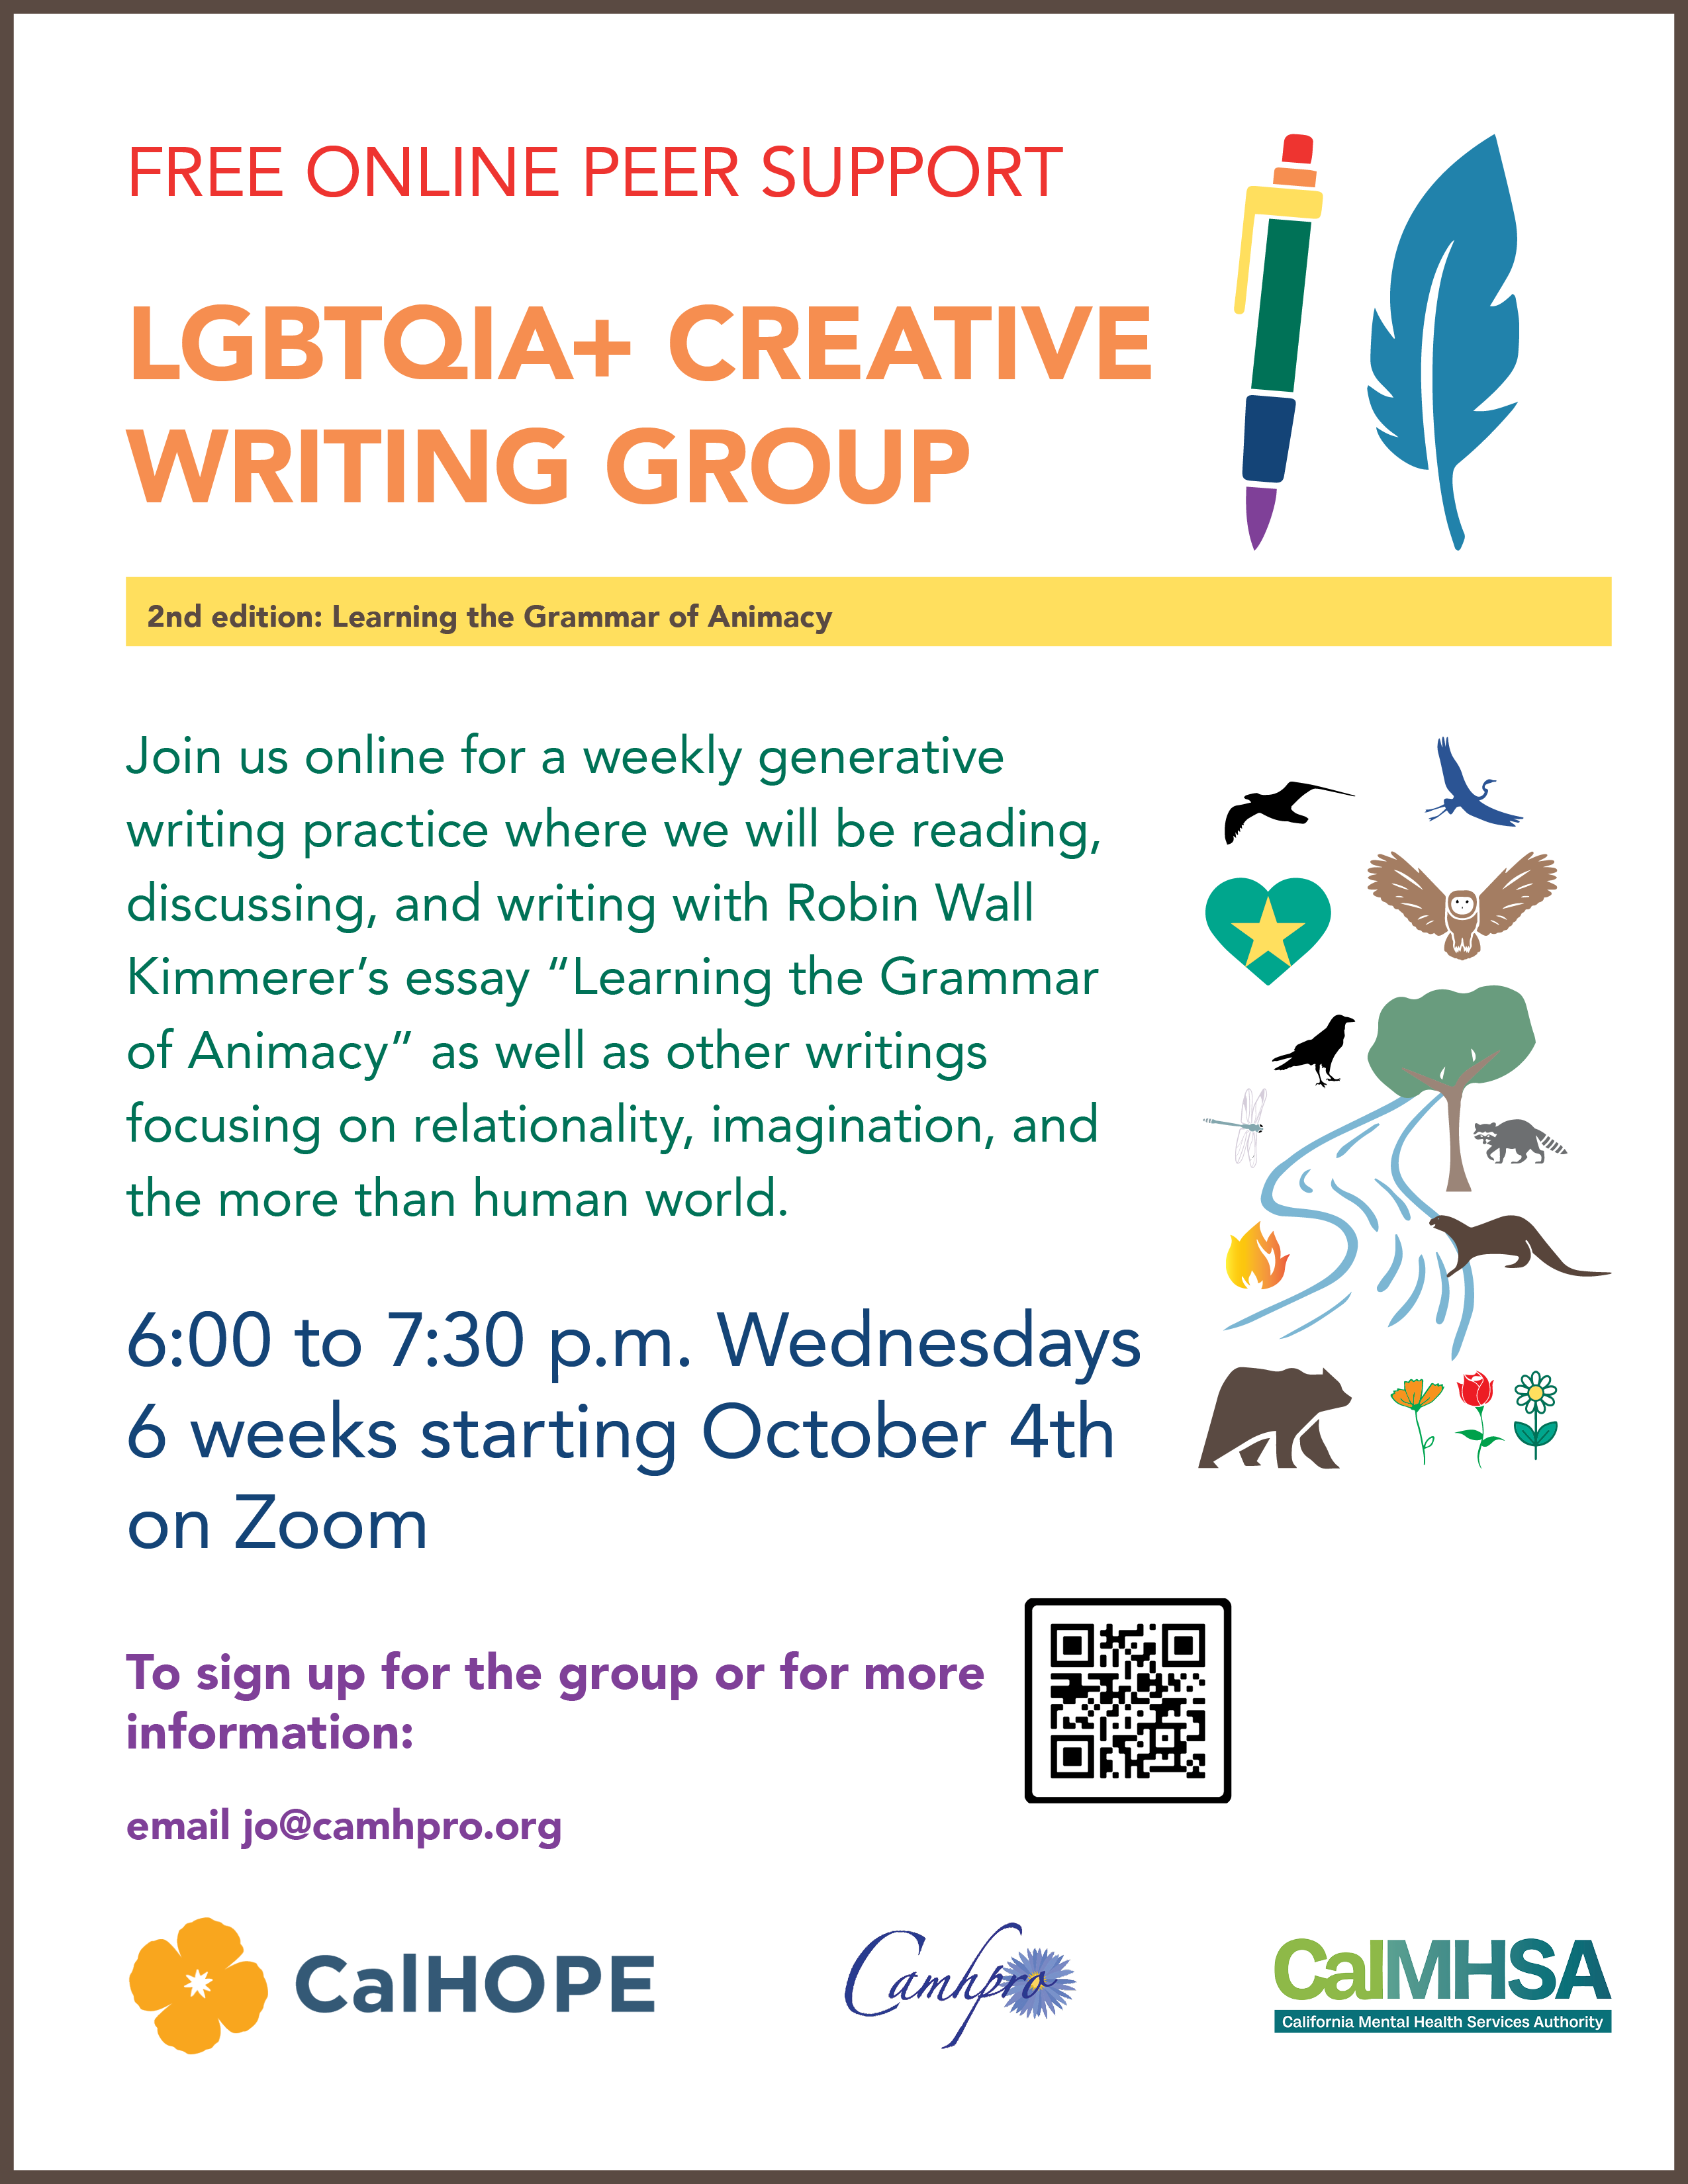 LGBTQIA+ CREATIVE WRITING GROUP, 2nd edition: Learning the Grammar of Animacy